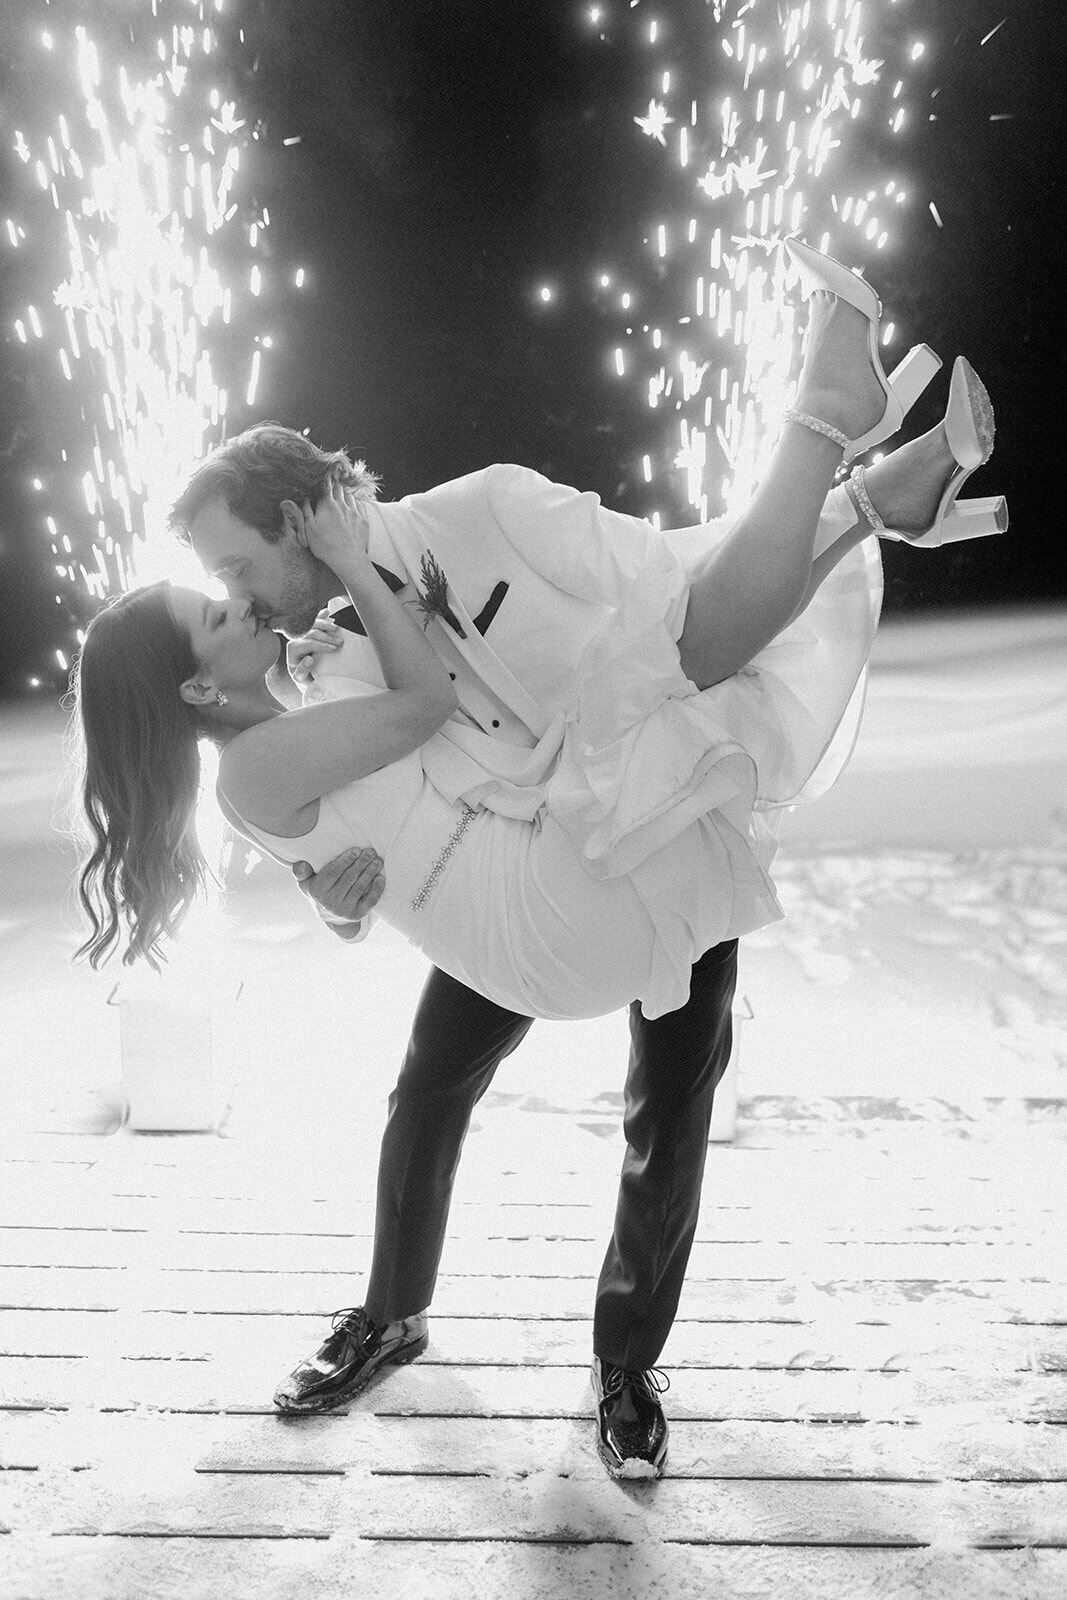 Couple's first dance during wedding reception with sparklers in background, captured by Nikki Collette, featured on the Brontë Bride Wedding Vendor Guide.